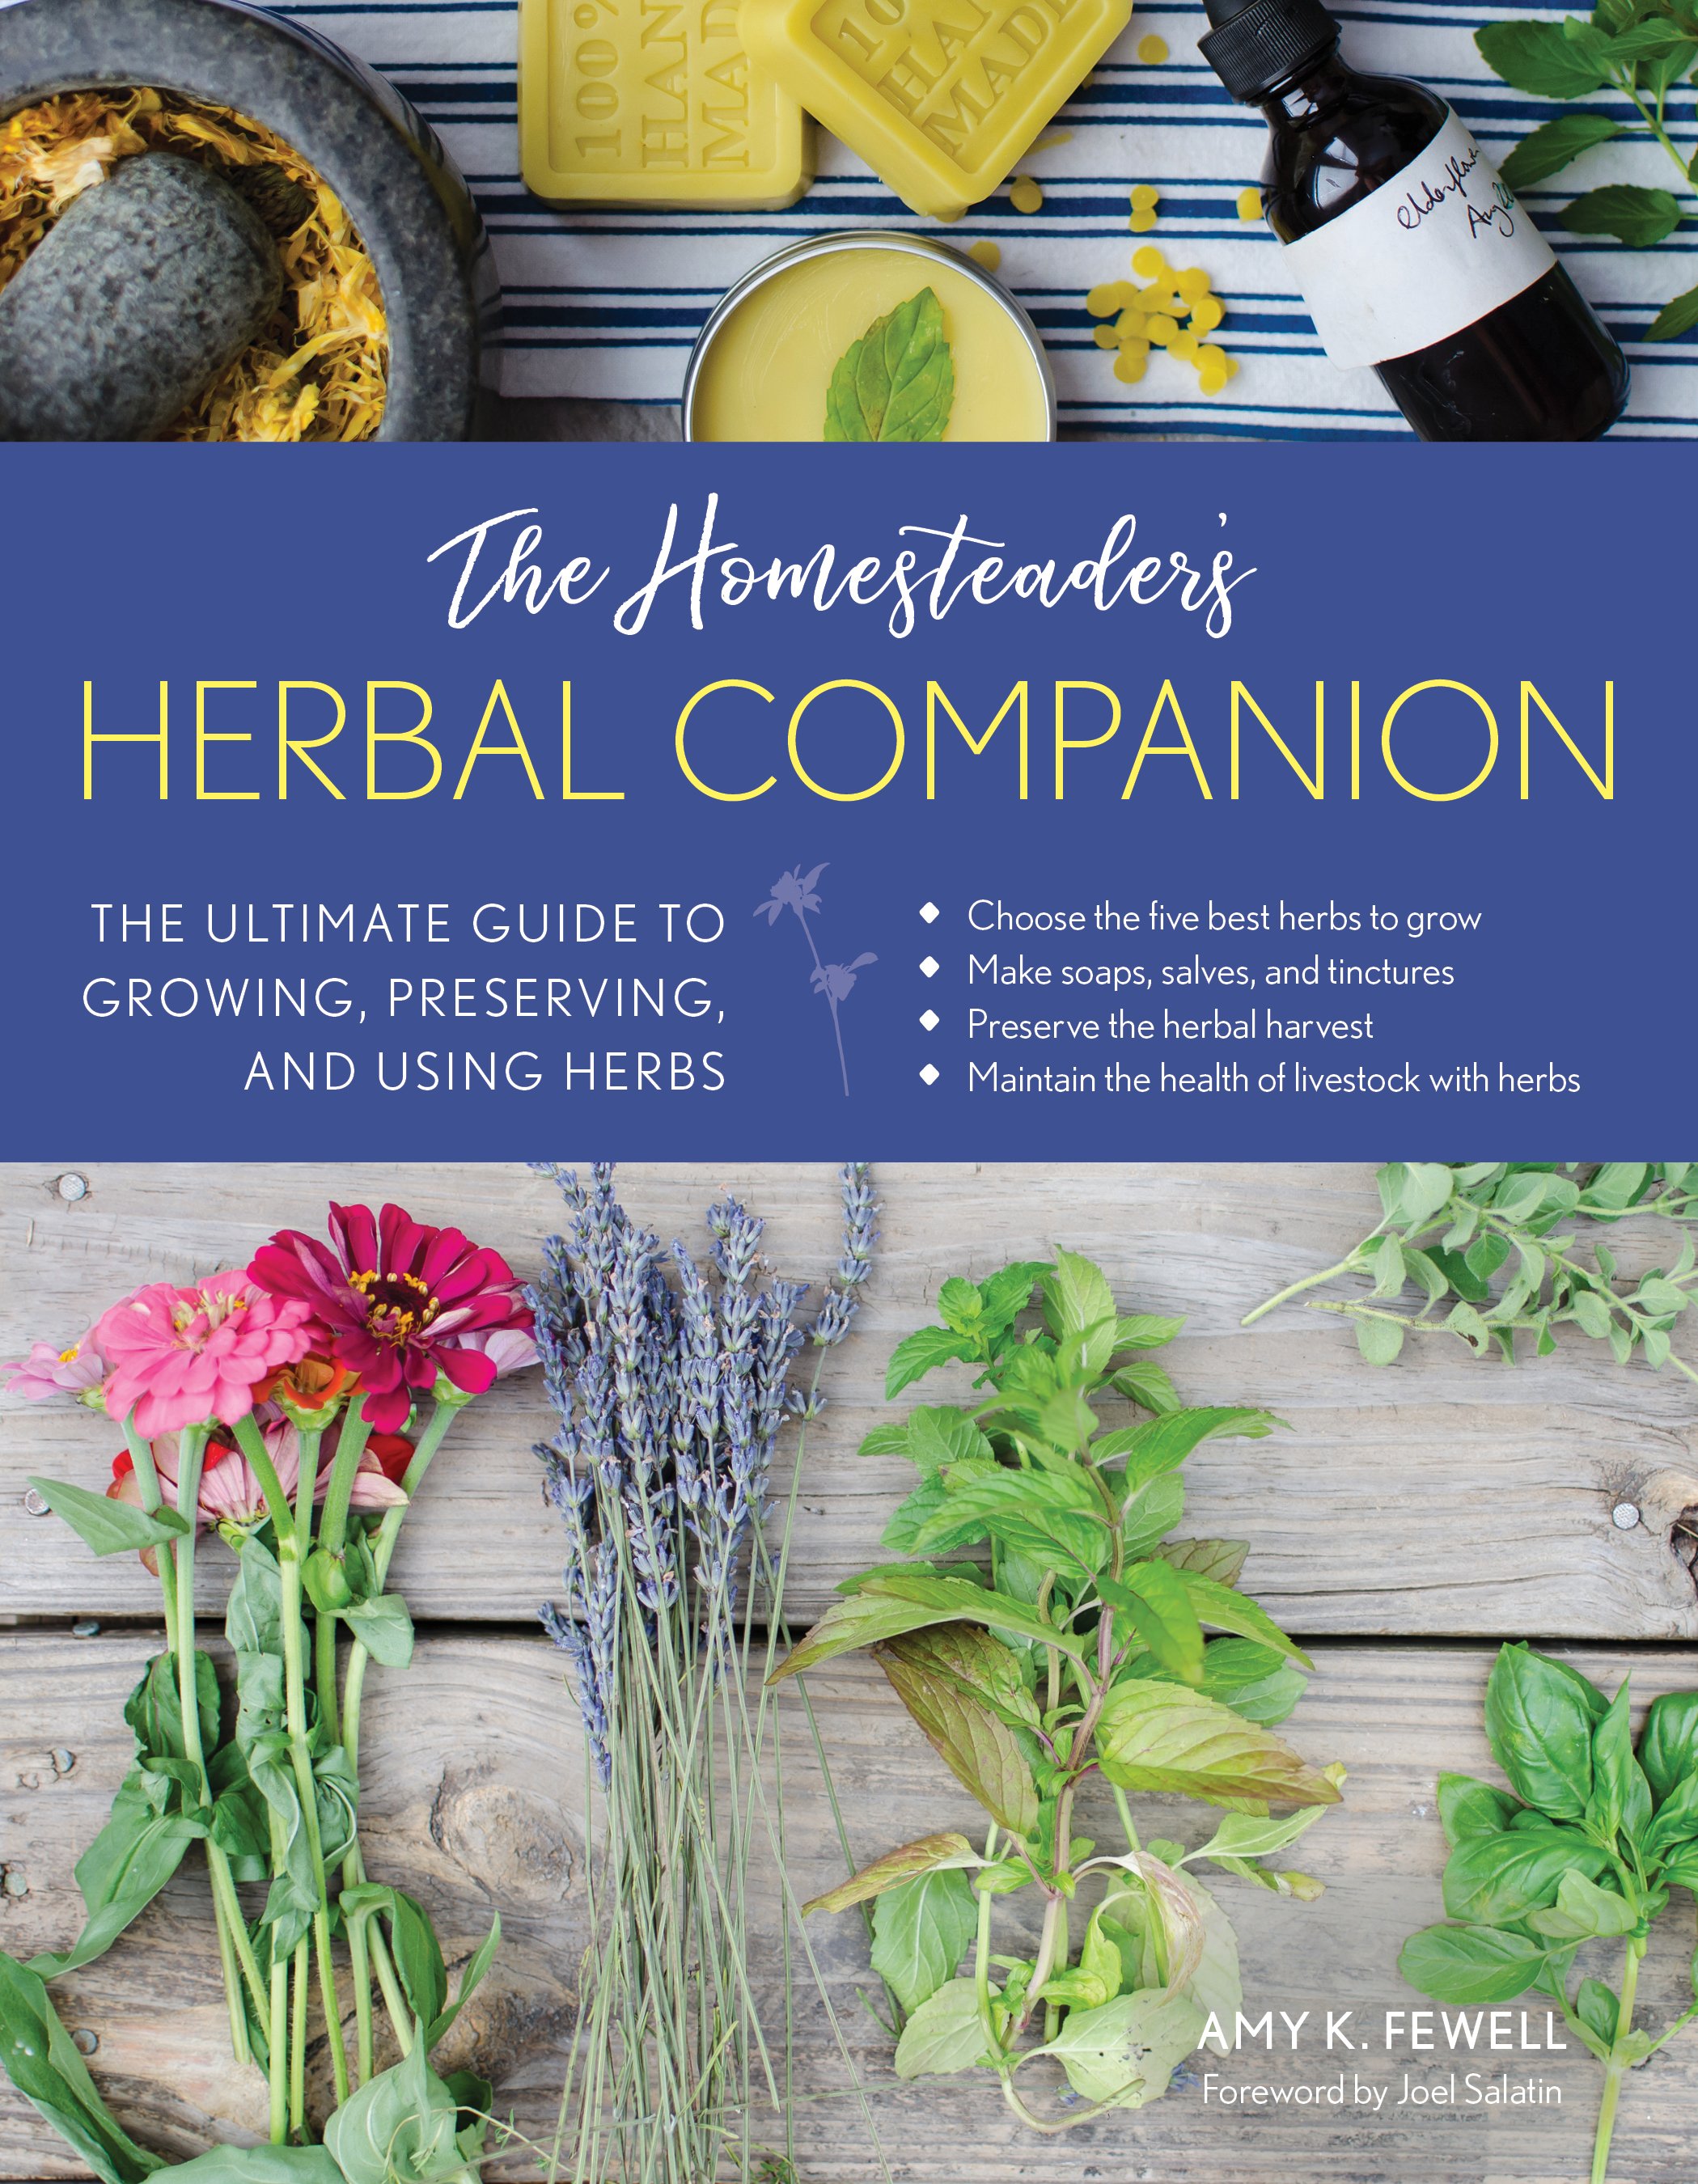 Image for "The Homesteader's Herbal Companion"